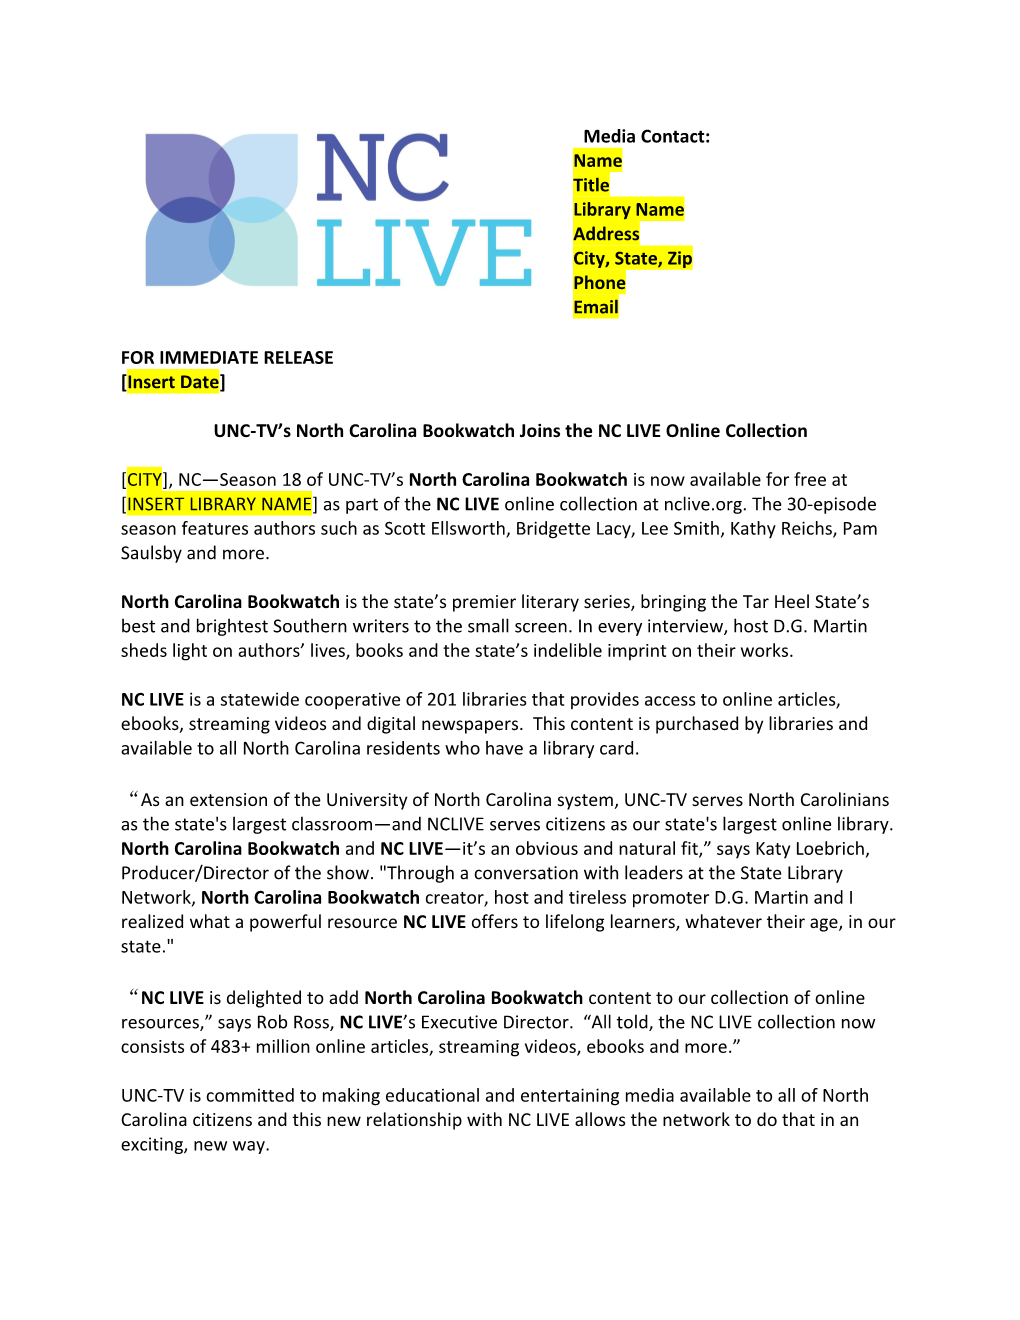 UNC-TV S North Carolinabookwatch Joins Thencliveonline Collection